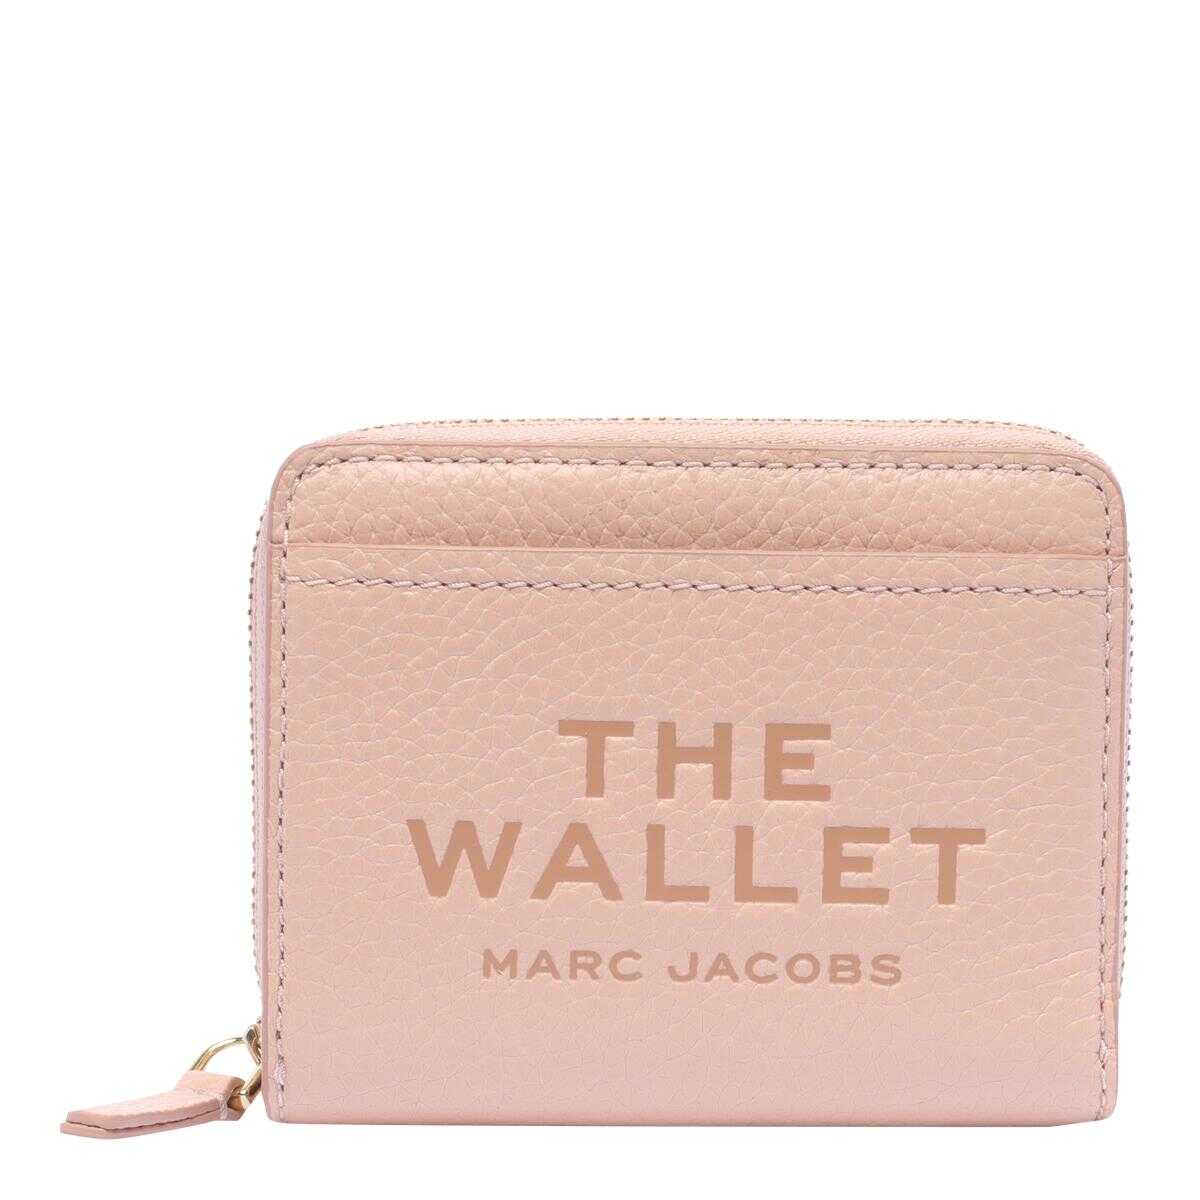 Marc Jacobs Marc Jacobs Wallets PINK